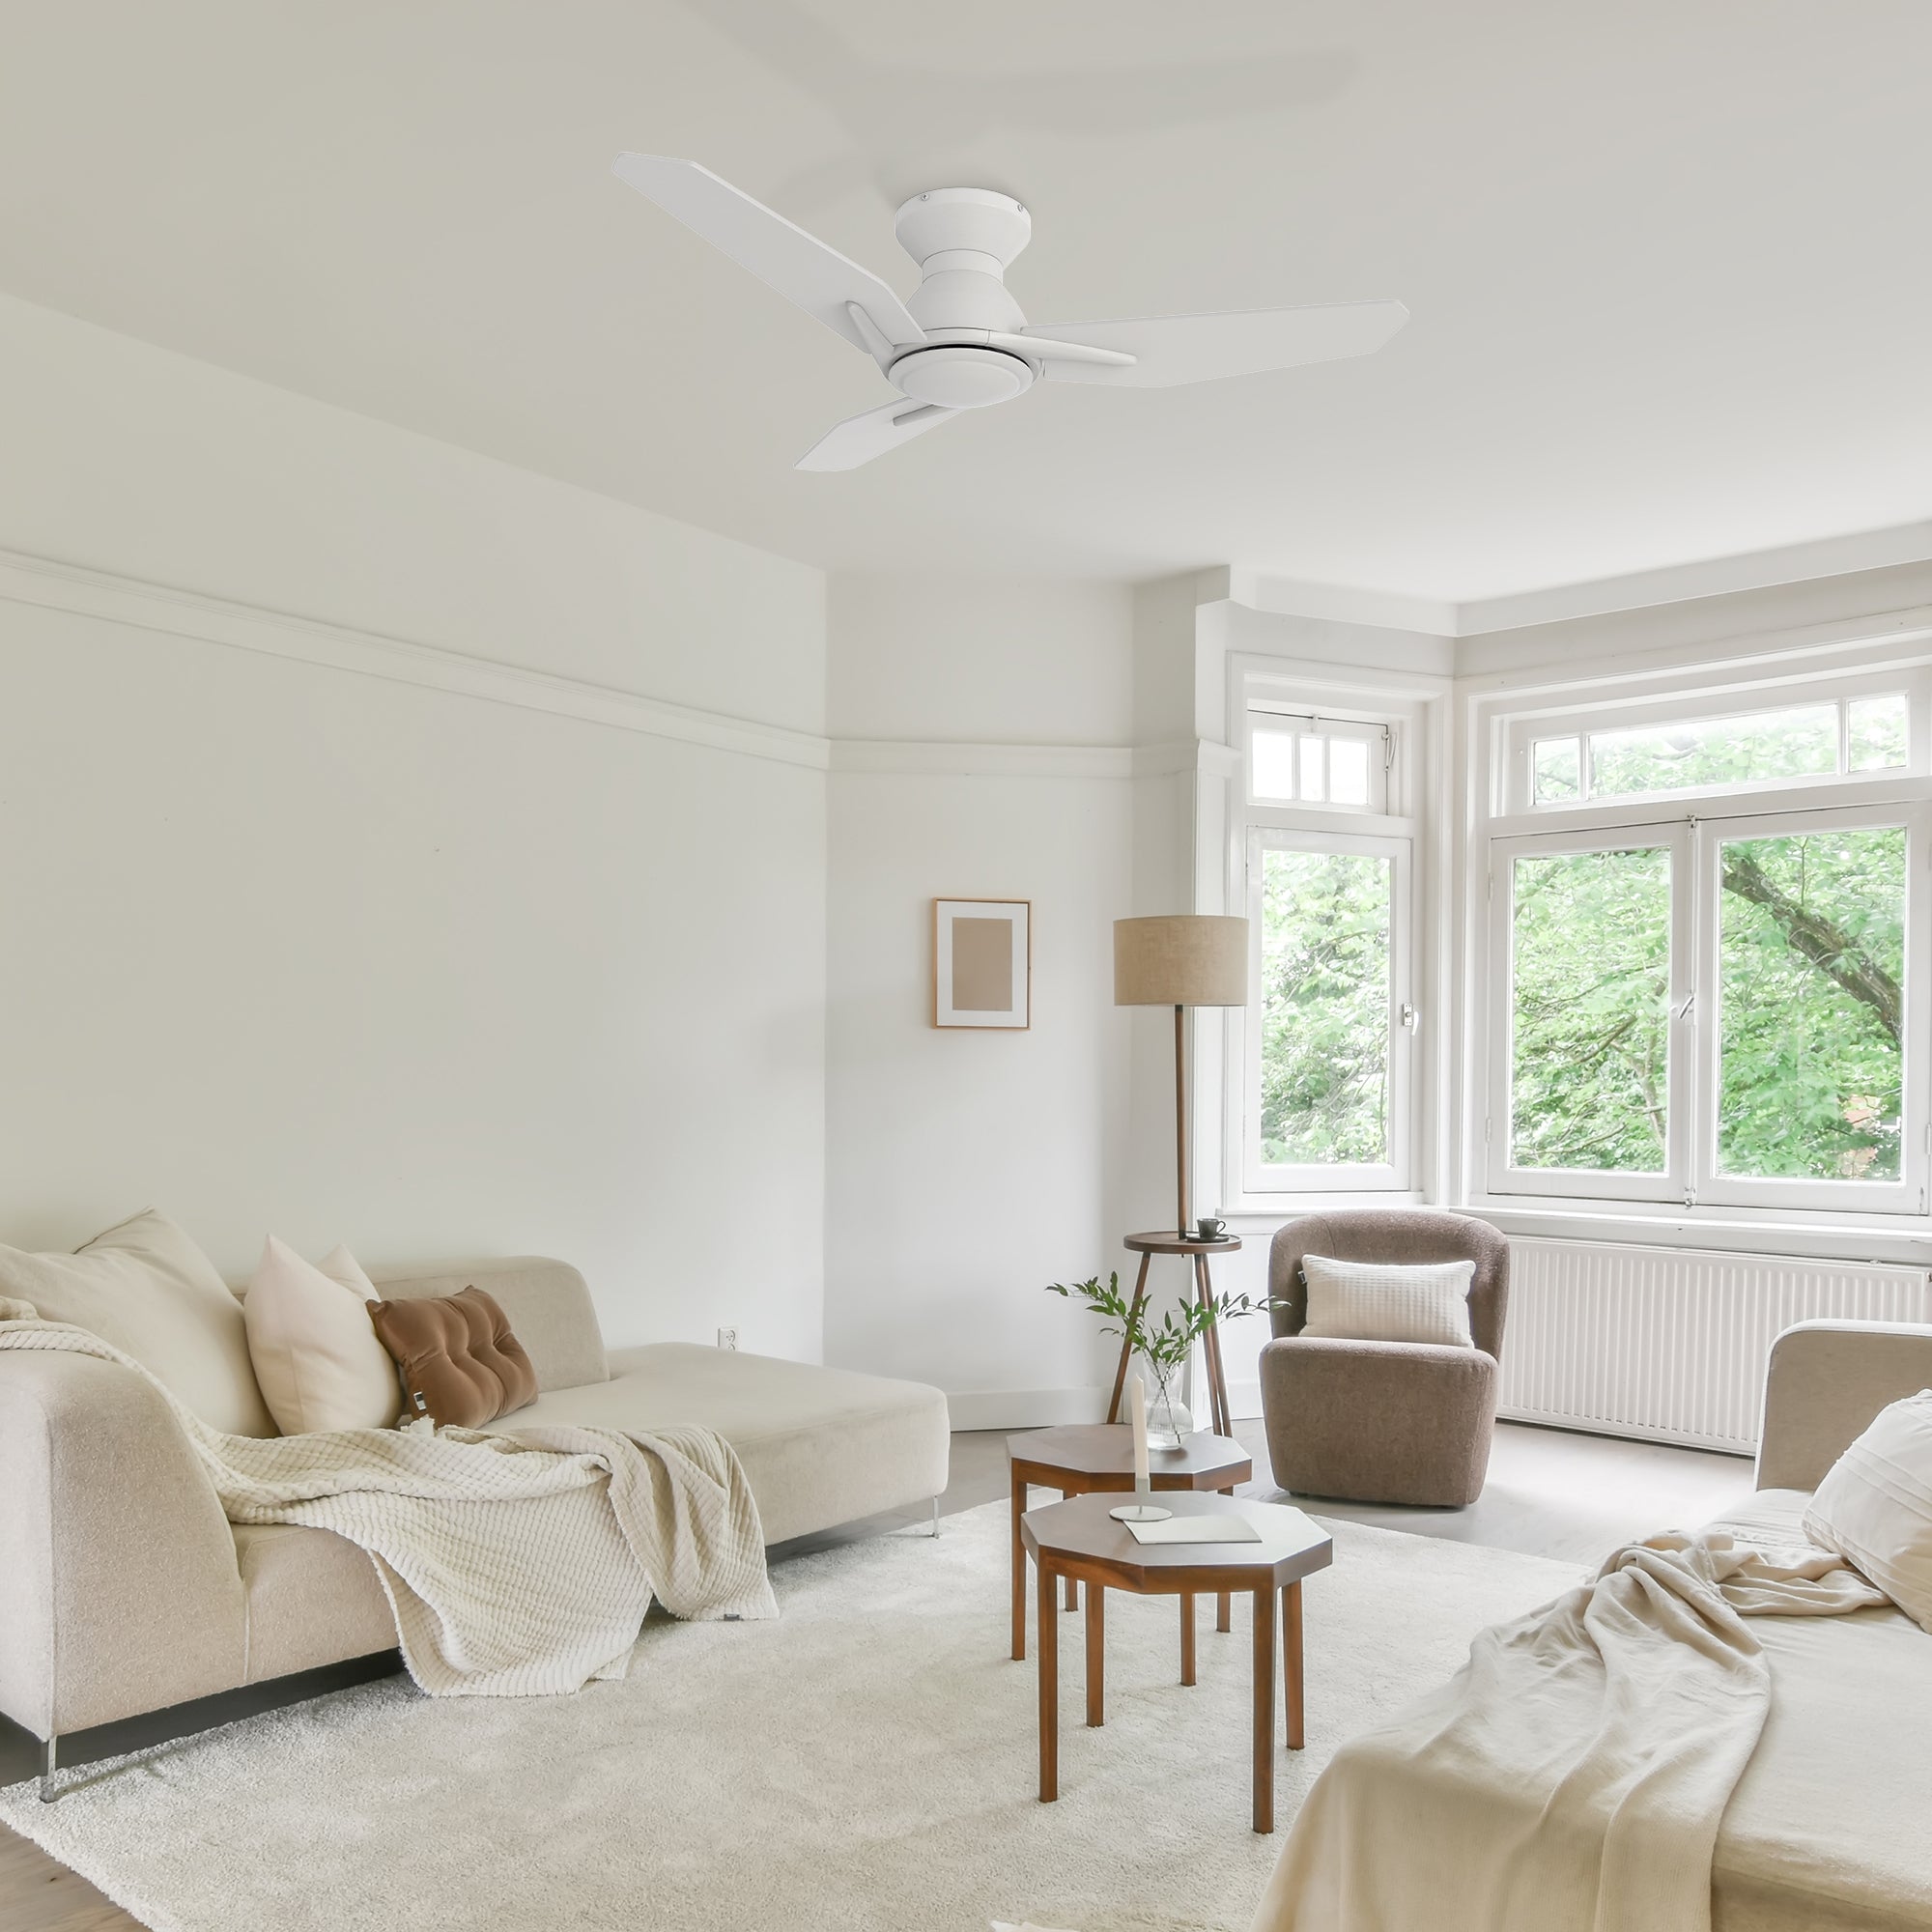 Flush mount ceiling fan with remote 44 inch, featuring a white finish design that complements modern living rooms. This indoor ceiling fan is also suitable for small room sizes. 